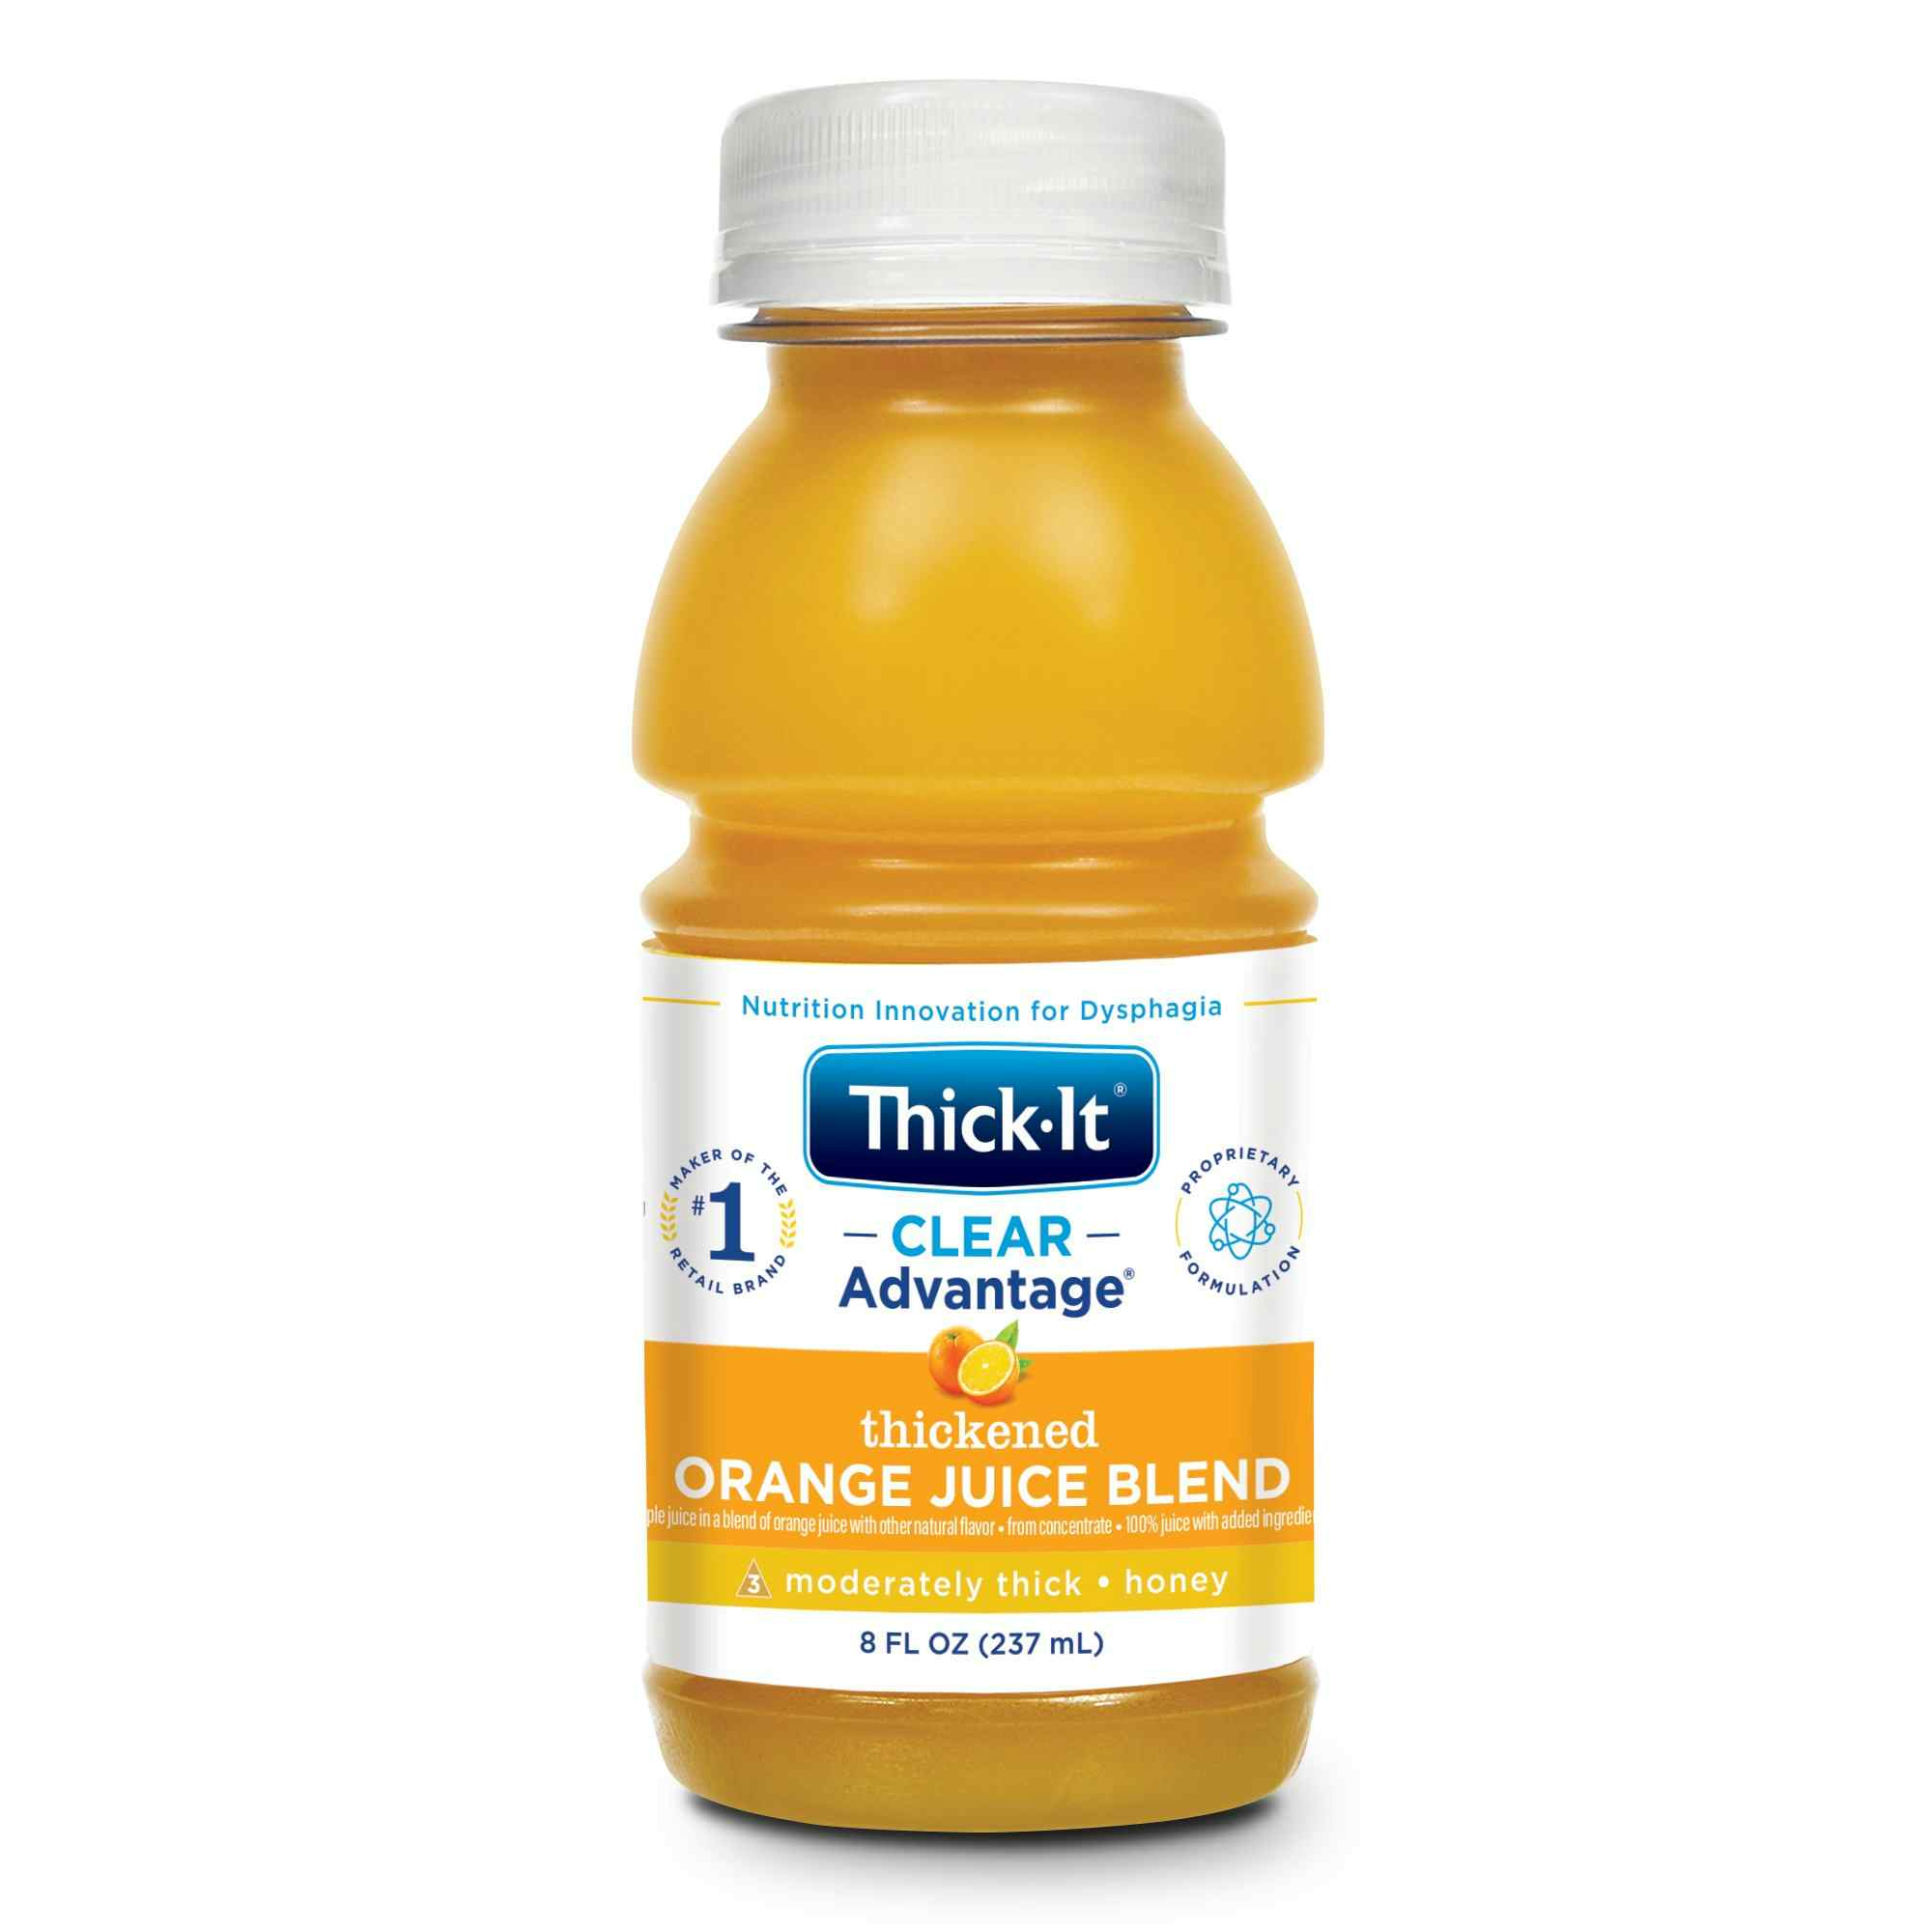 Thick-It Clear Advantage Thickened Orange Juice Blend, Moderately Thick, Honey Consistency, B478-L9044, 8 oz. - Case of 24